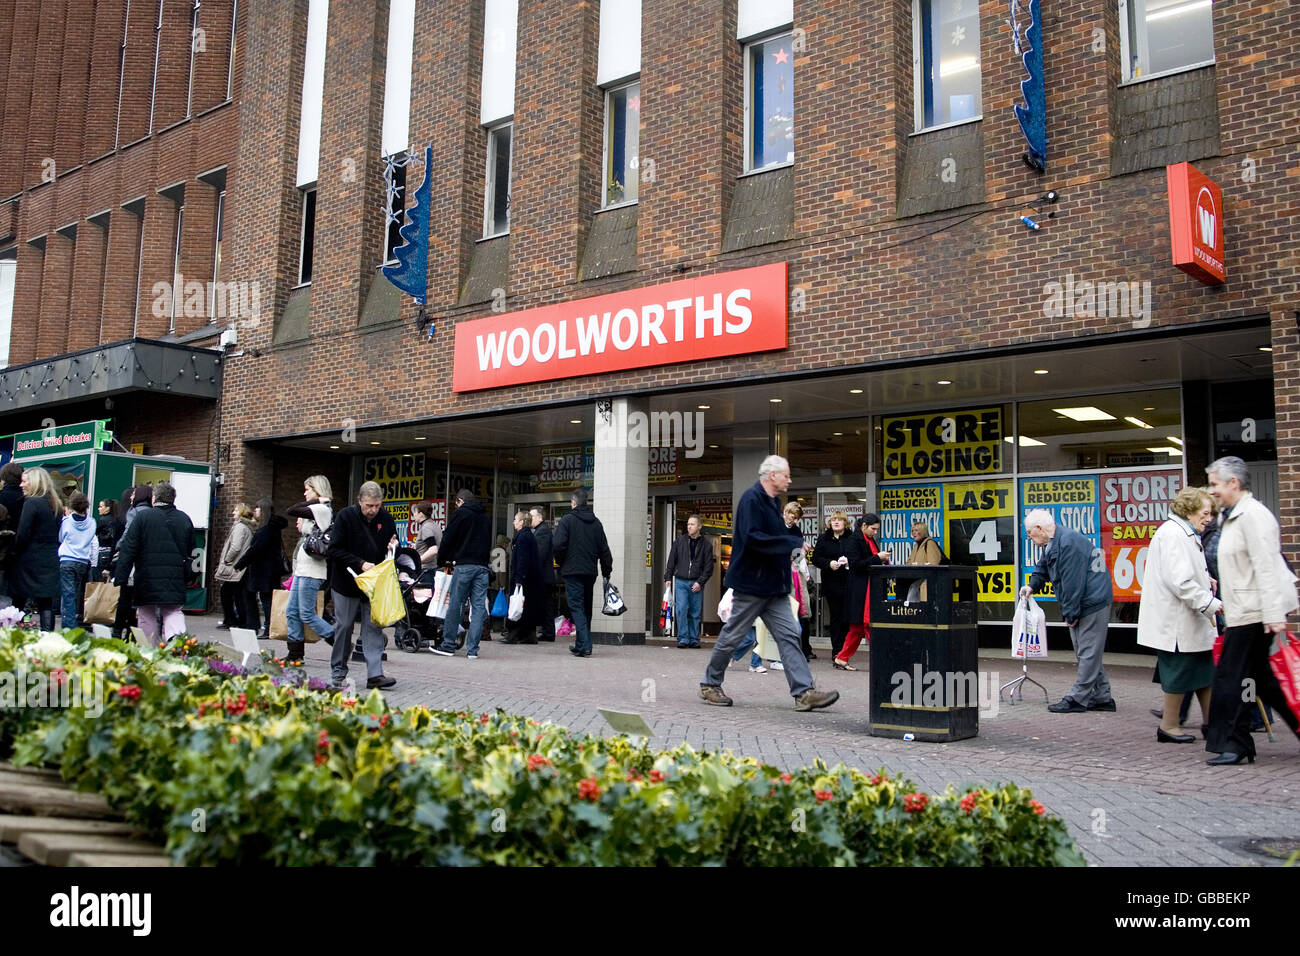 General view of the front of a Woolworths store in Hanley, Stoke-On-Trent, shortly before closing. 7-9 Upper Market Sq Stoke-on-Trent, ST1 1PY Stock Photo